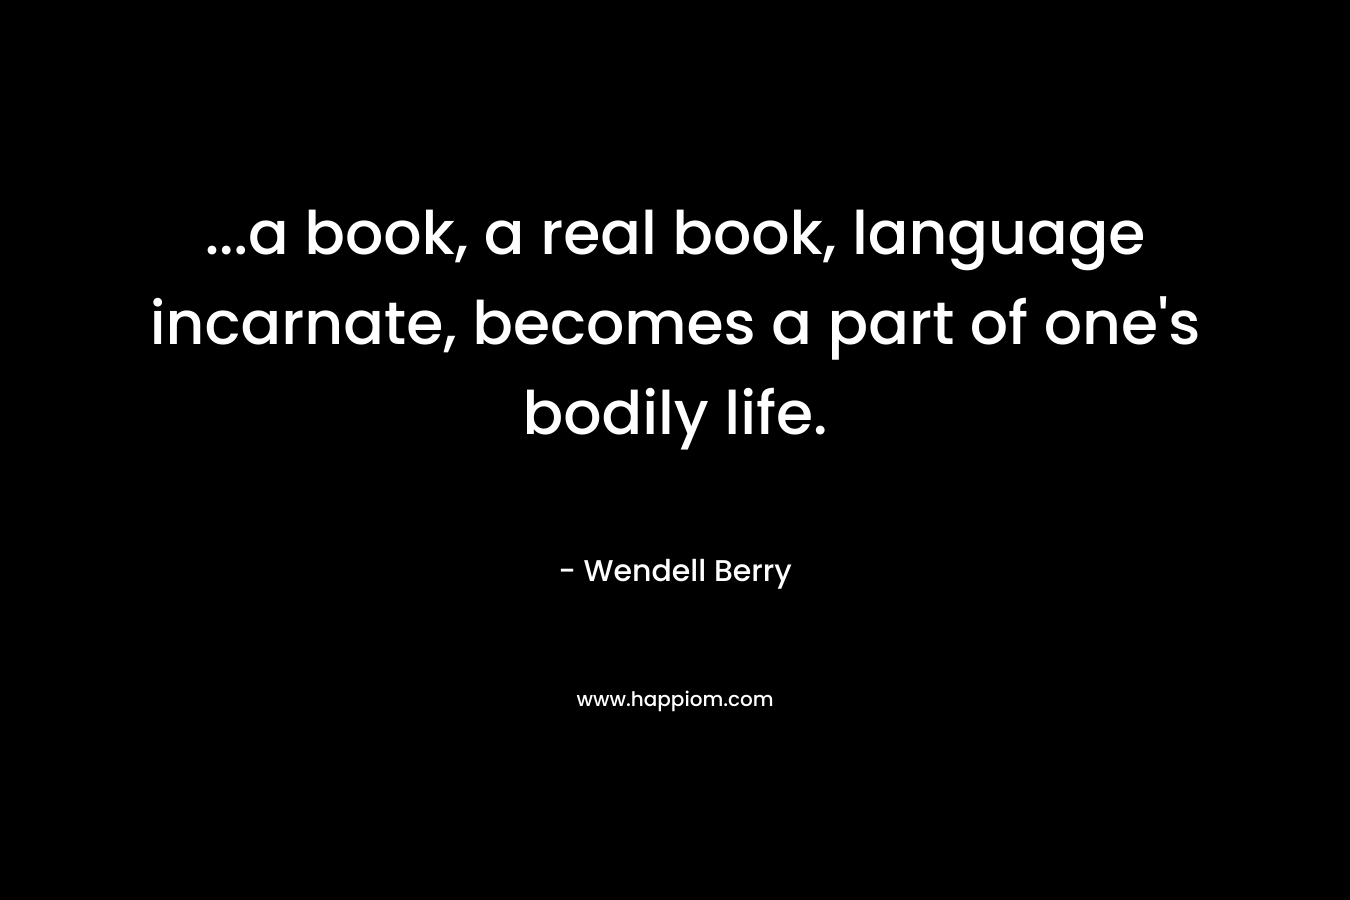 ...a book, a real book, language incarnate, becomes a part of one's bodily life.